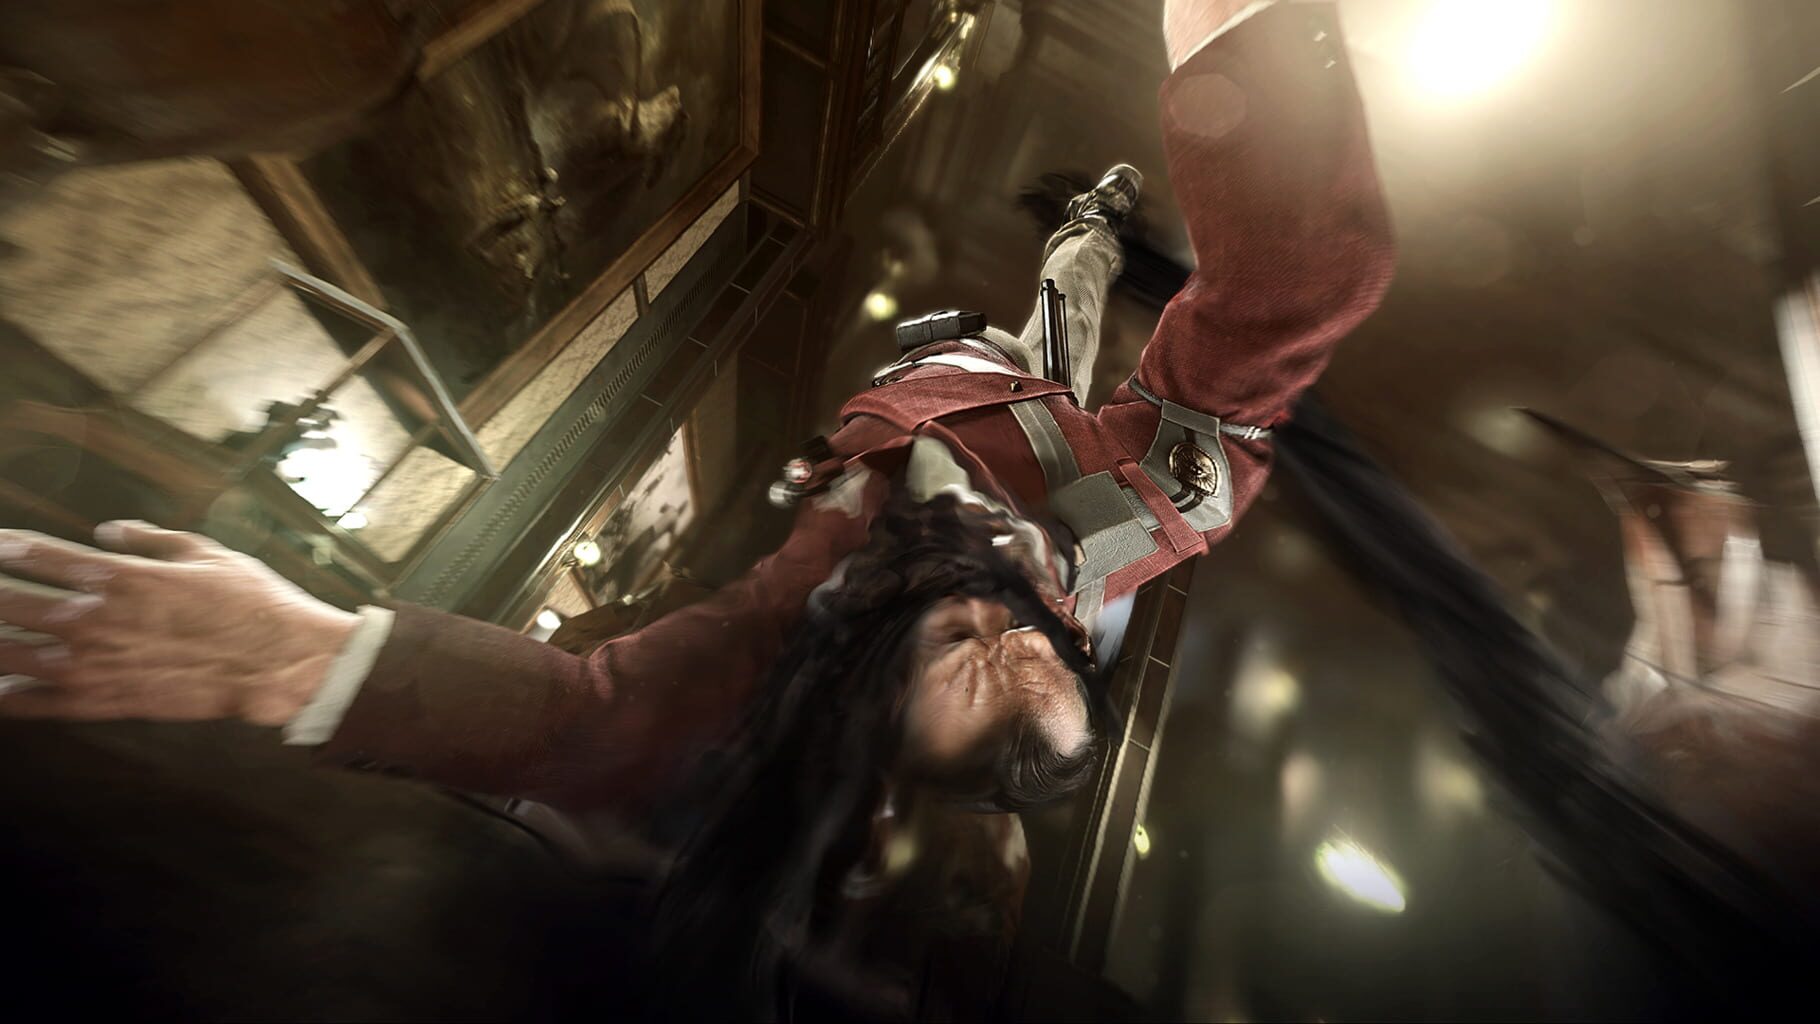 Dishonored: Death of the Outsider Deluxe Bundle Image